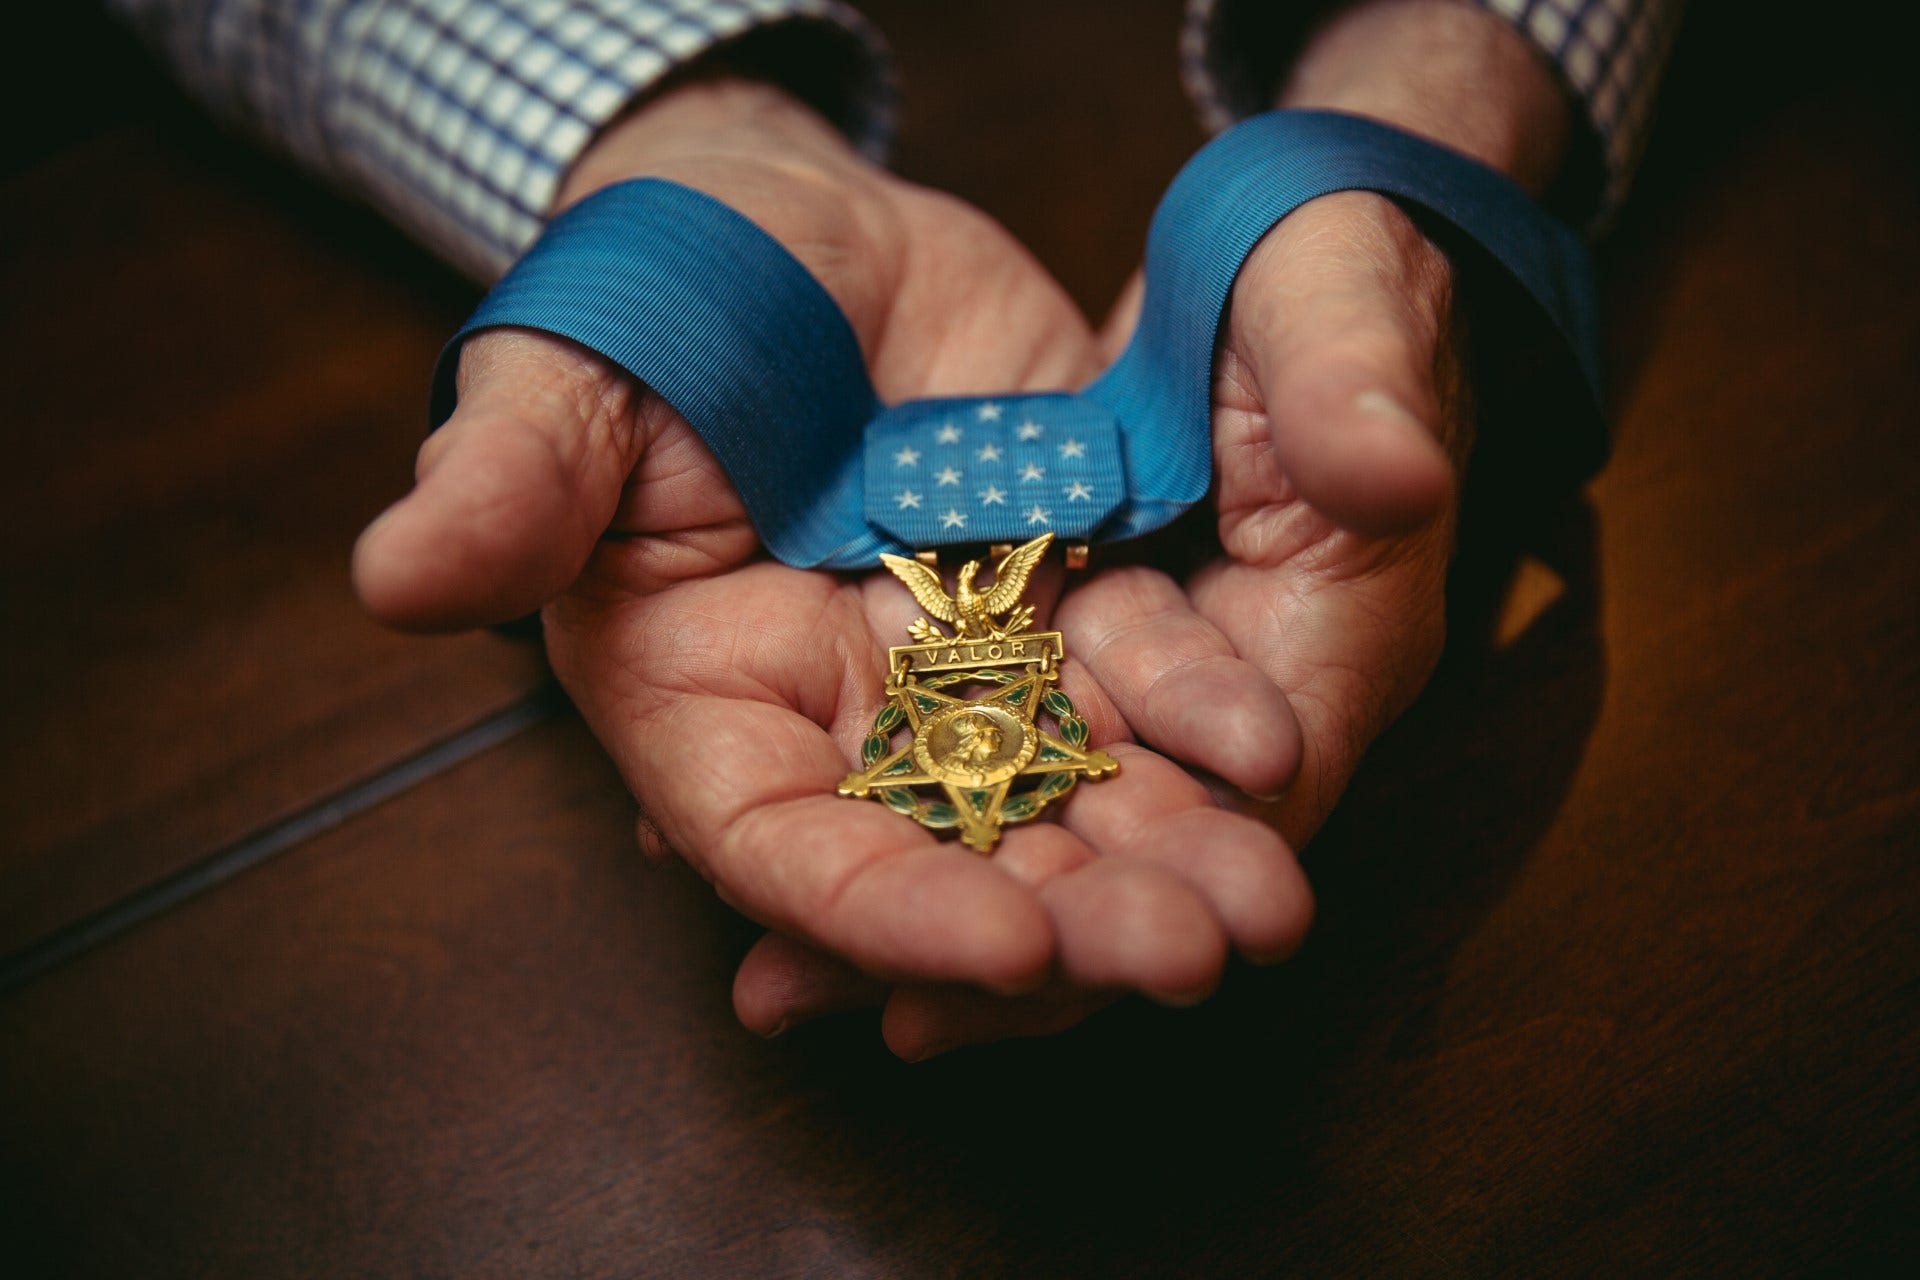 Medal of Honor recipient shows heroism by helping others